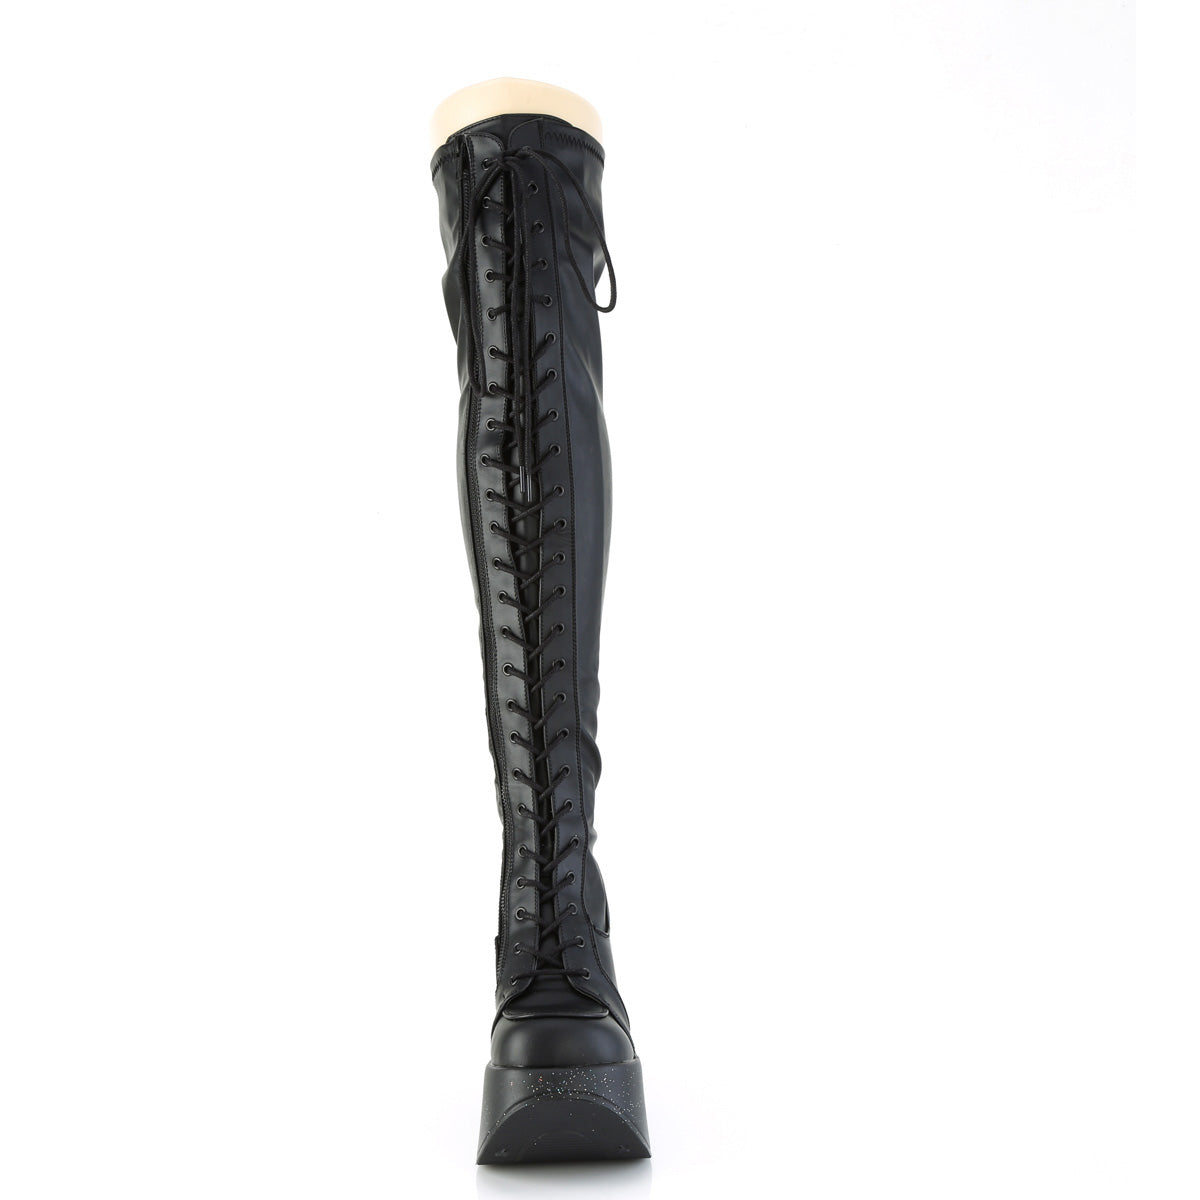 *5"Star Cutout Pf Wedge Lace-Up Thigh-High Boot,Outside Zip Pleaser Demonia DYNAMITE/300/1